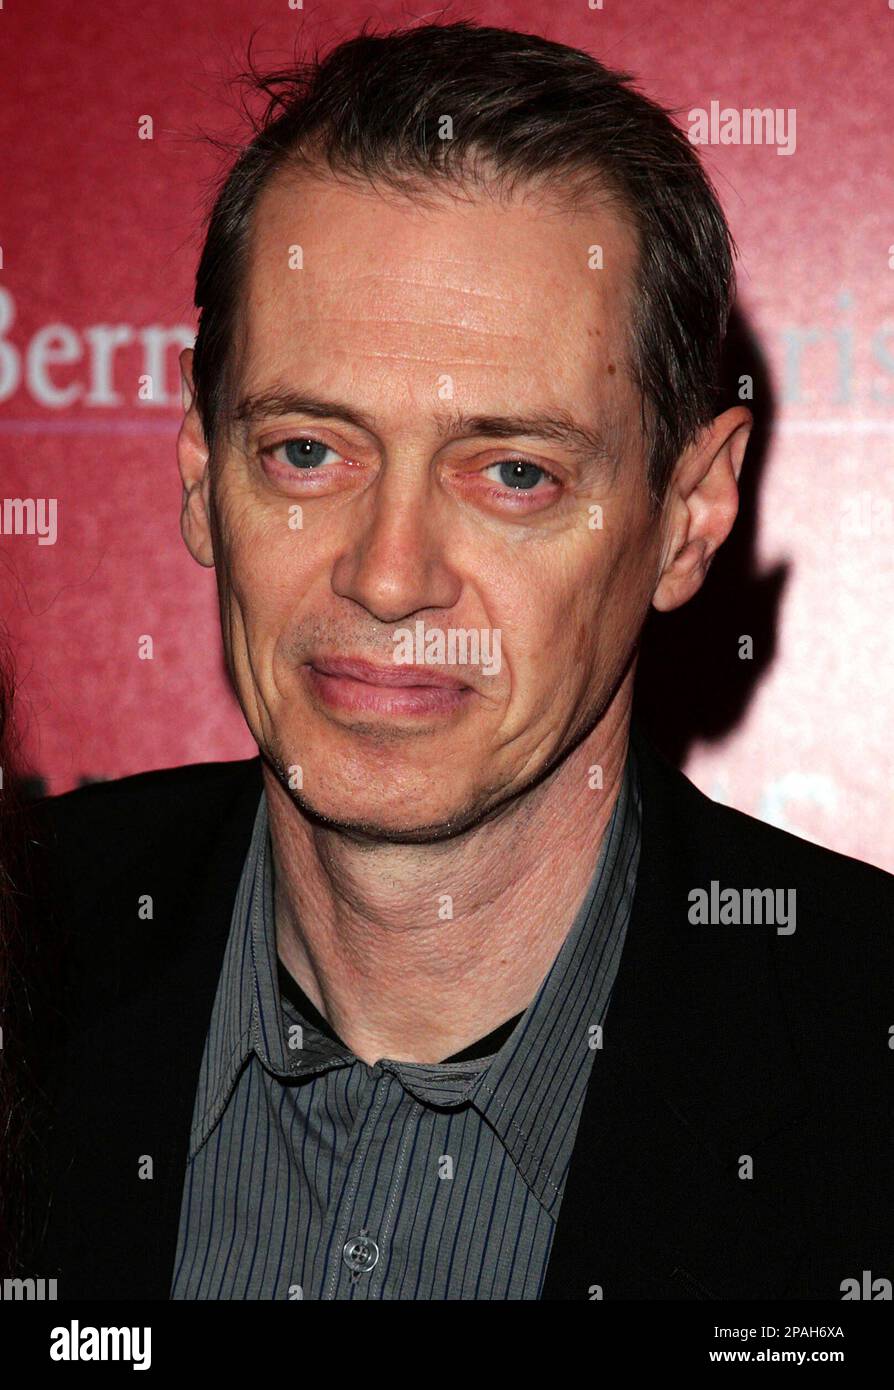 Actor Steve Buscemi arrives for a screening of Bernard and Doris at the Time Warner Center Wednesday, Jan. 30, 2008 in New York. (AP Photo/Gary He) Stock Photo